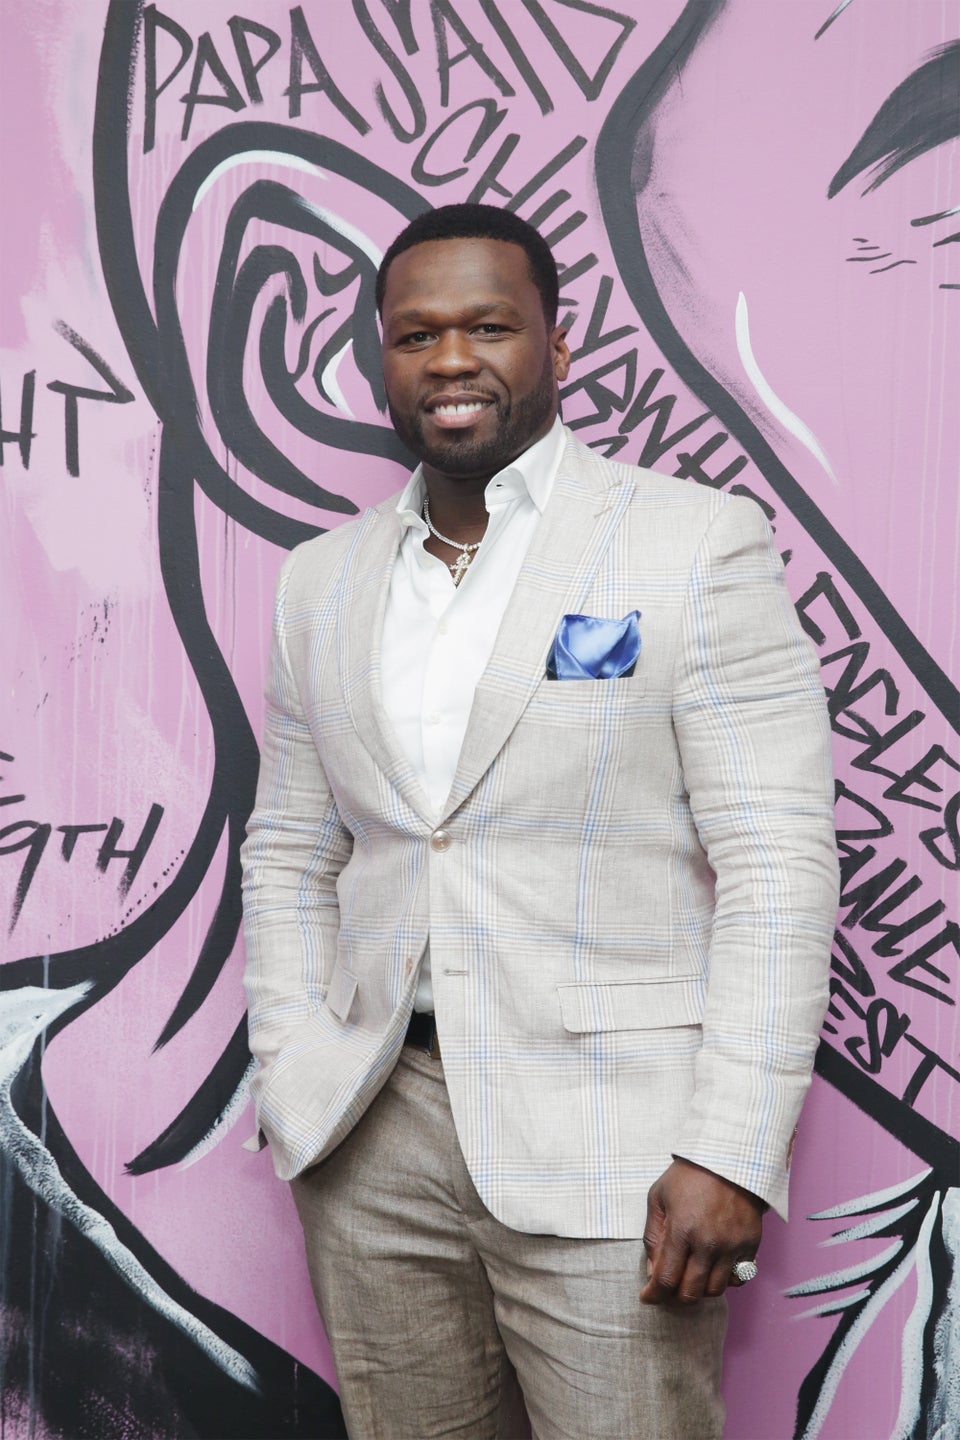 50 Cent Gets The Strap And Secures The Bag In New Starz Deal